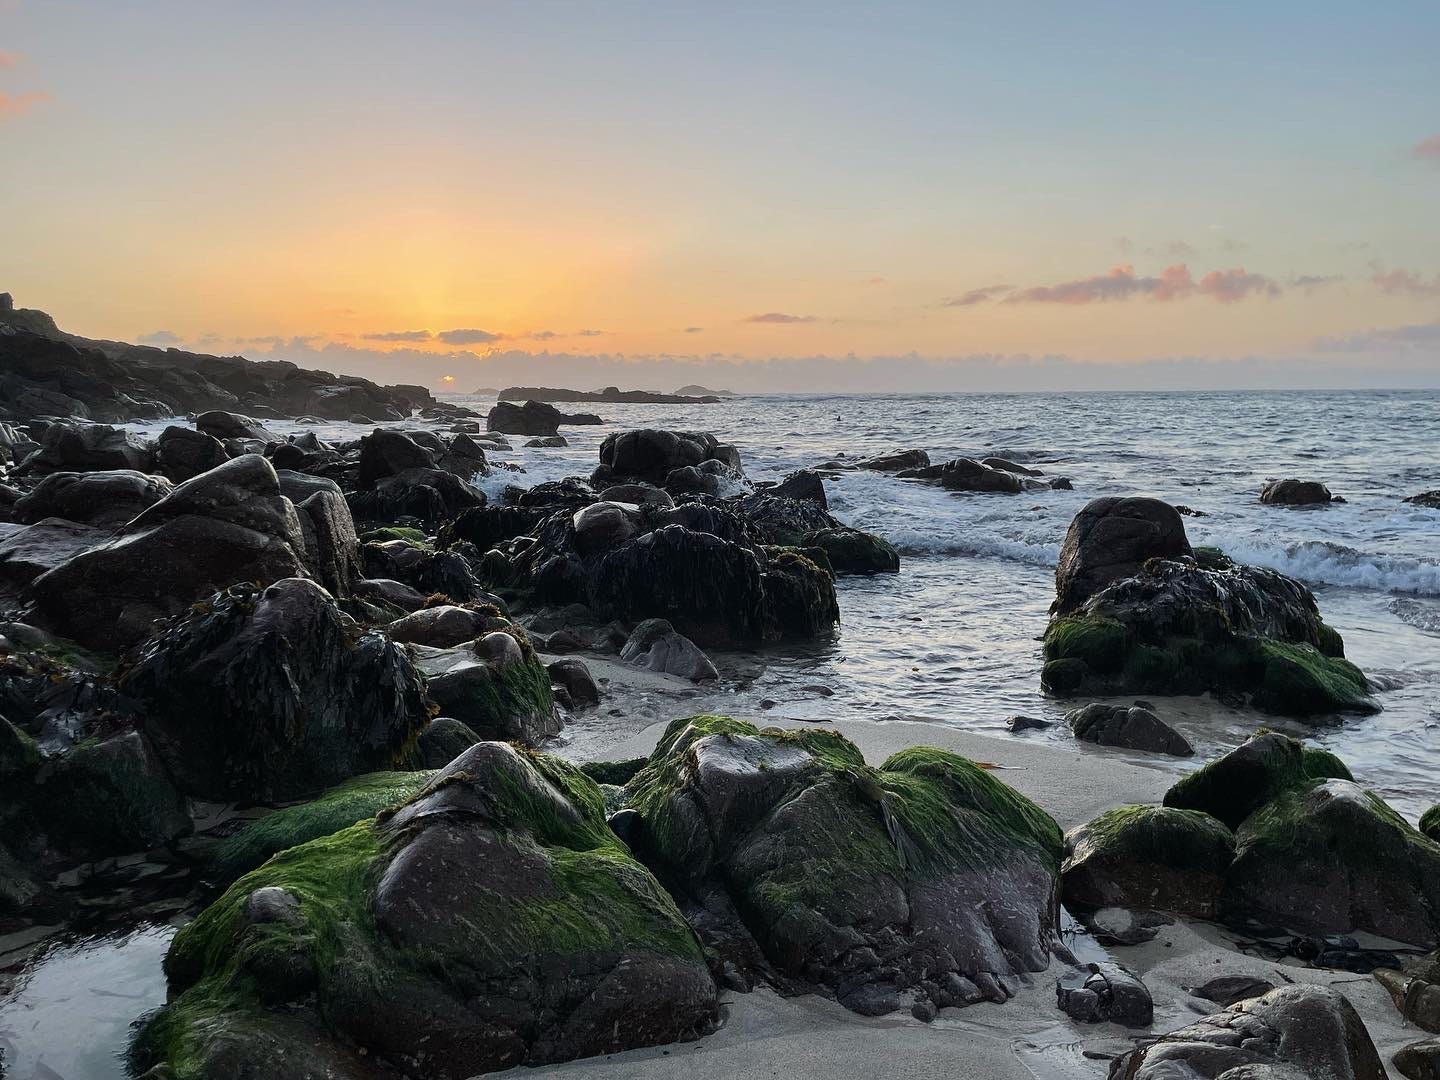 Colour photo of a beach at sunset with seaweed covered rocks and the sun setting behind the waves.